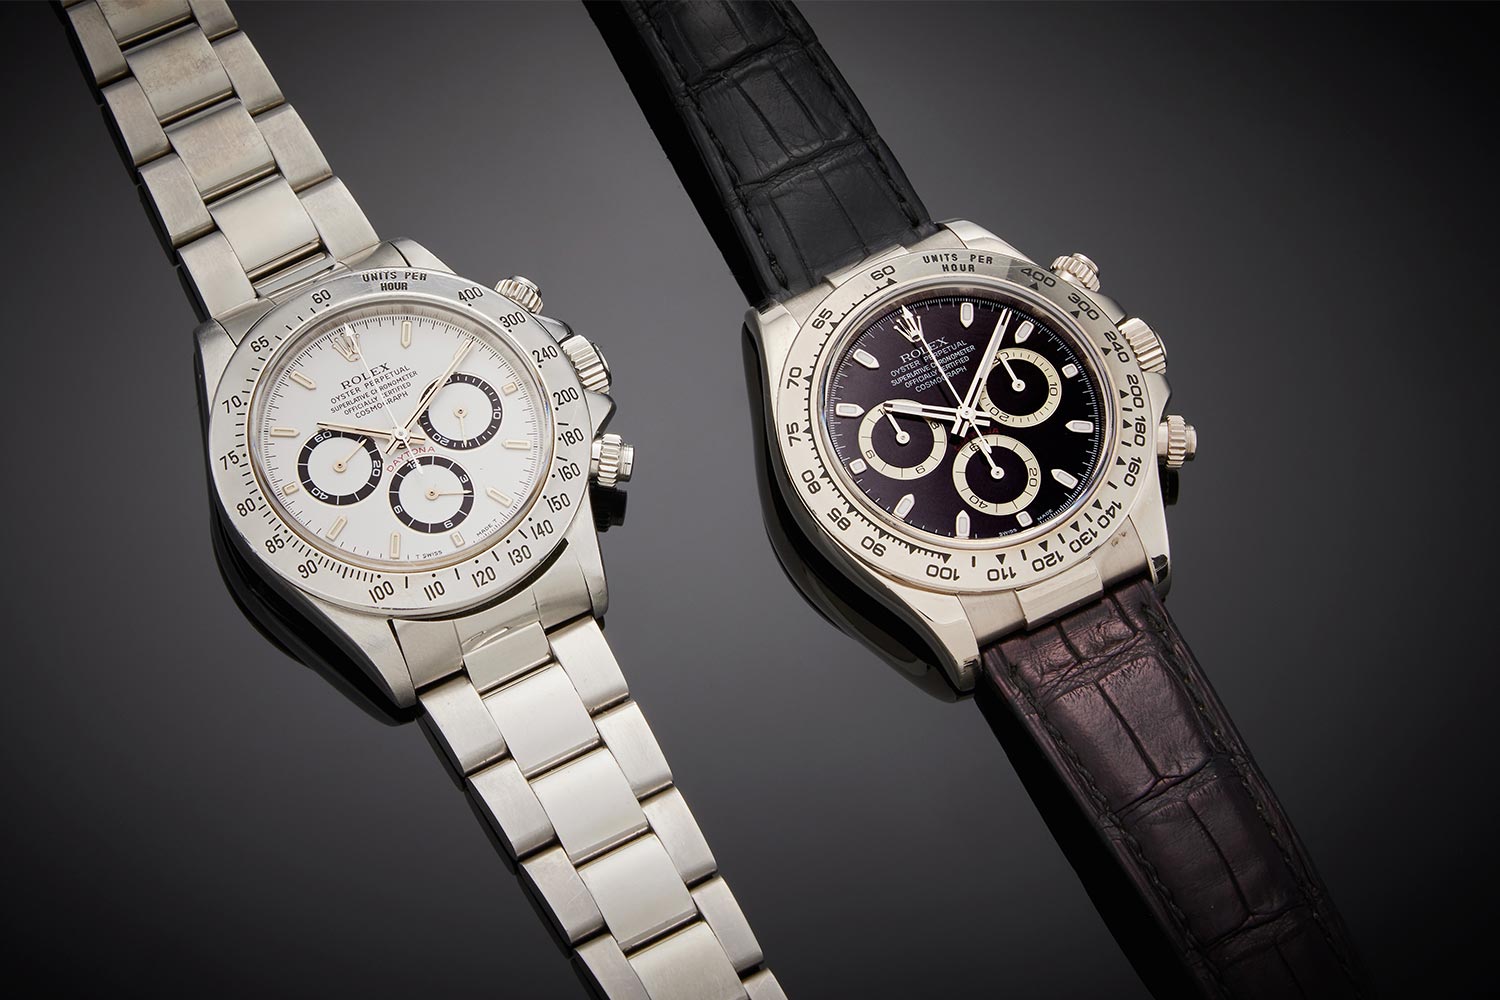 The two Paul Newman Rolex Daytona watches headed to auction at Sotheby's in June 2023